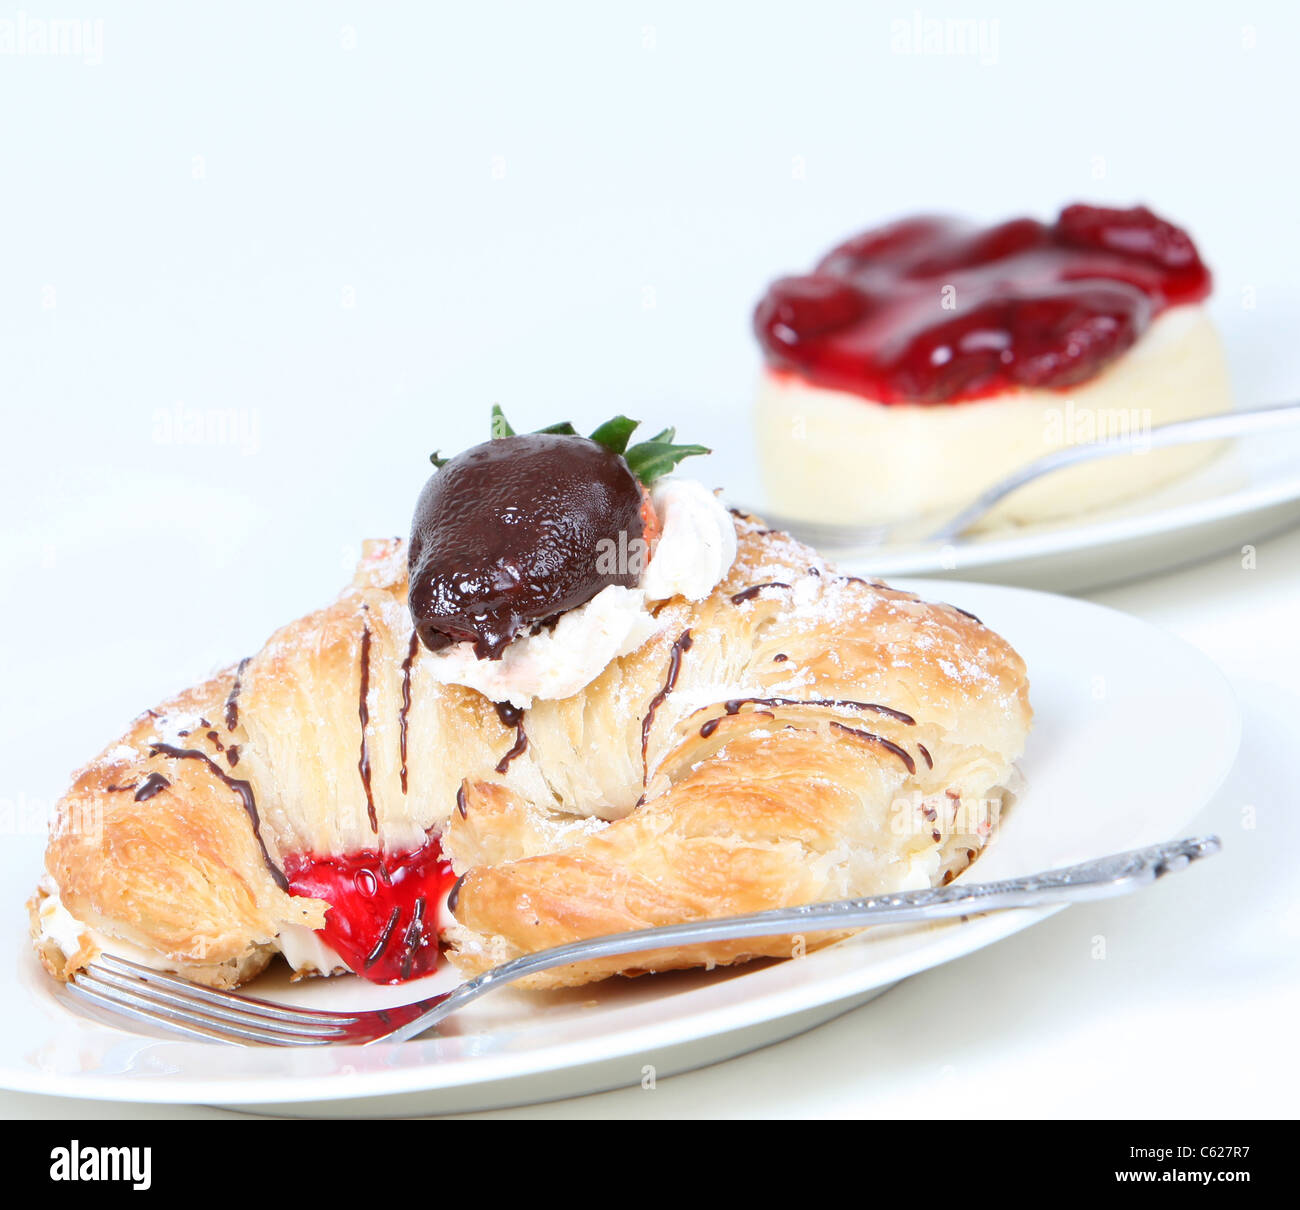 Cream filled croissant with chocolate strawberry and cheesecake Stock Photo